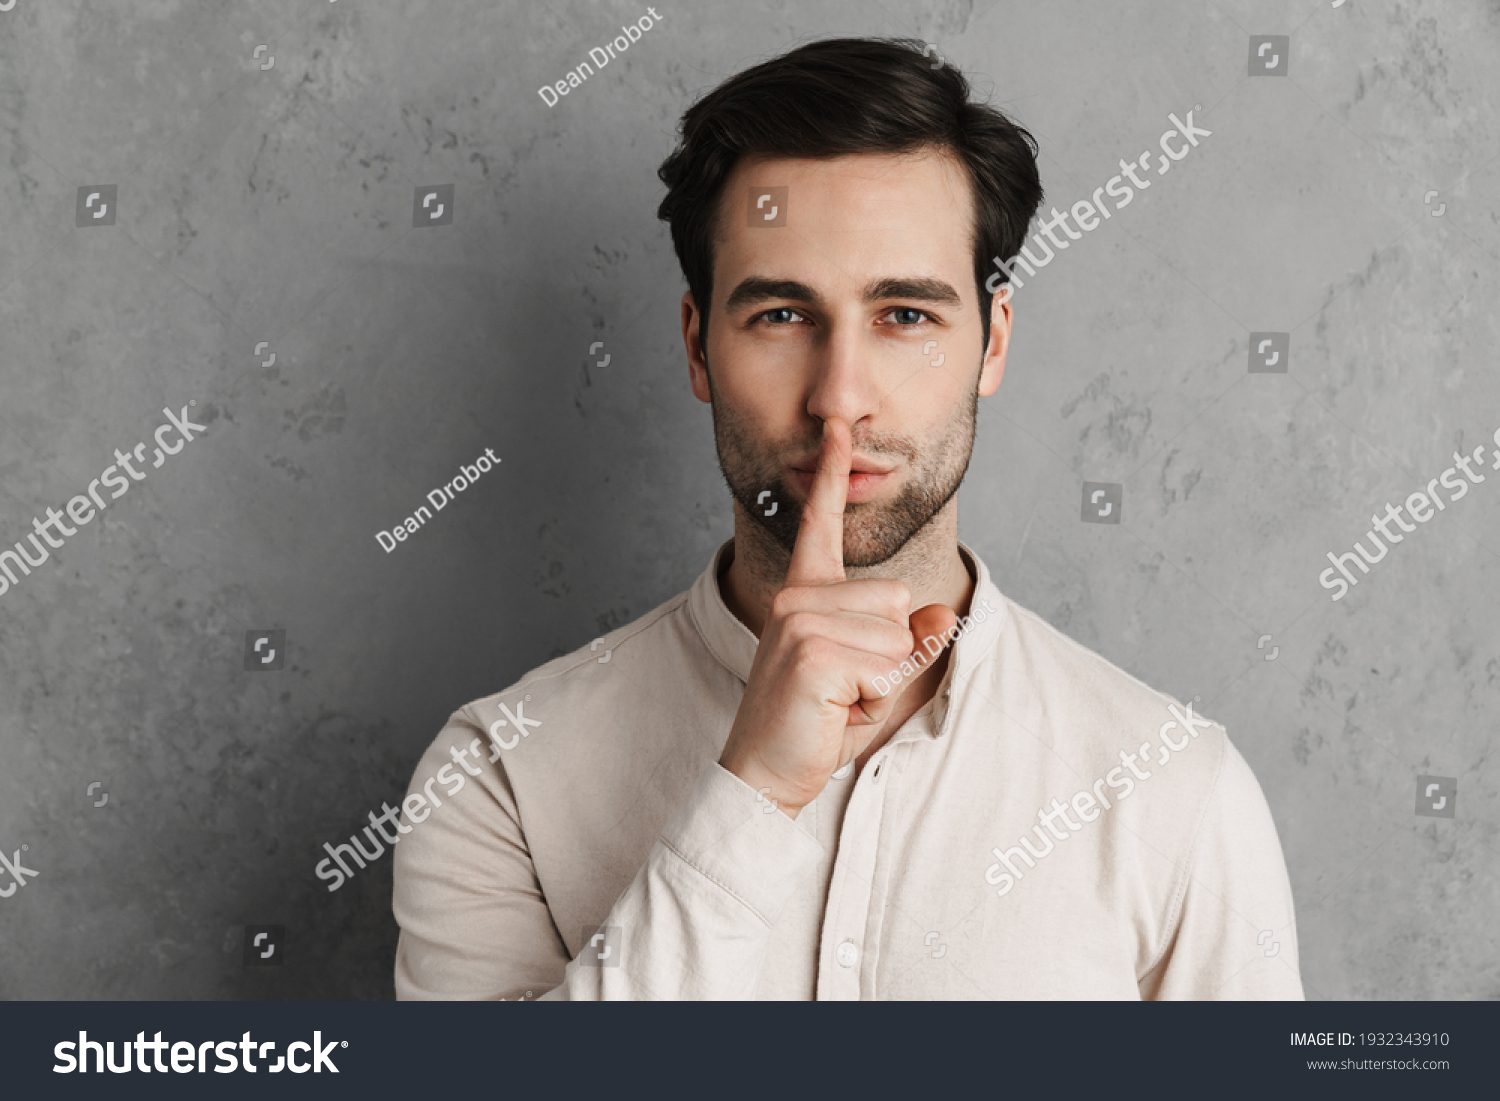 Smiling young man asking for silence gesturing with his finger isolated over gray background #1932343910